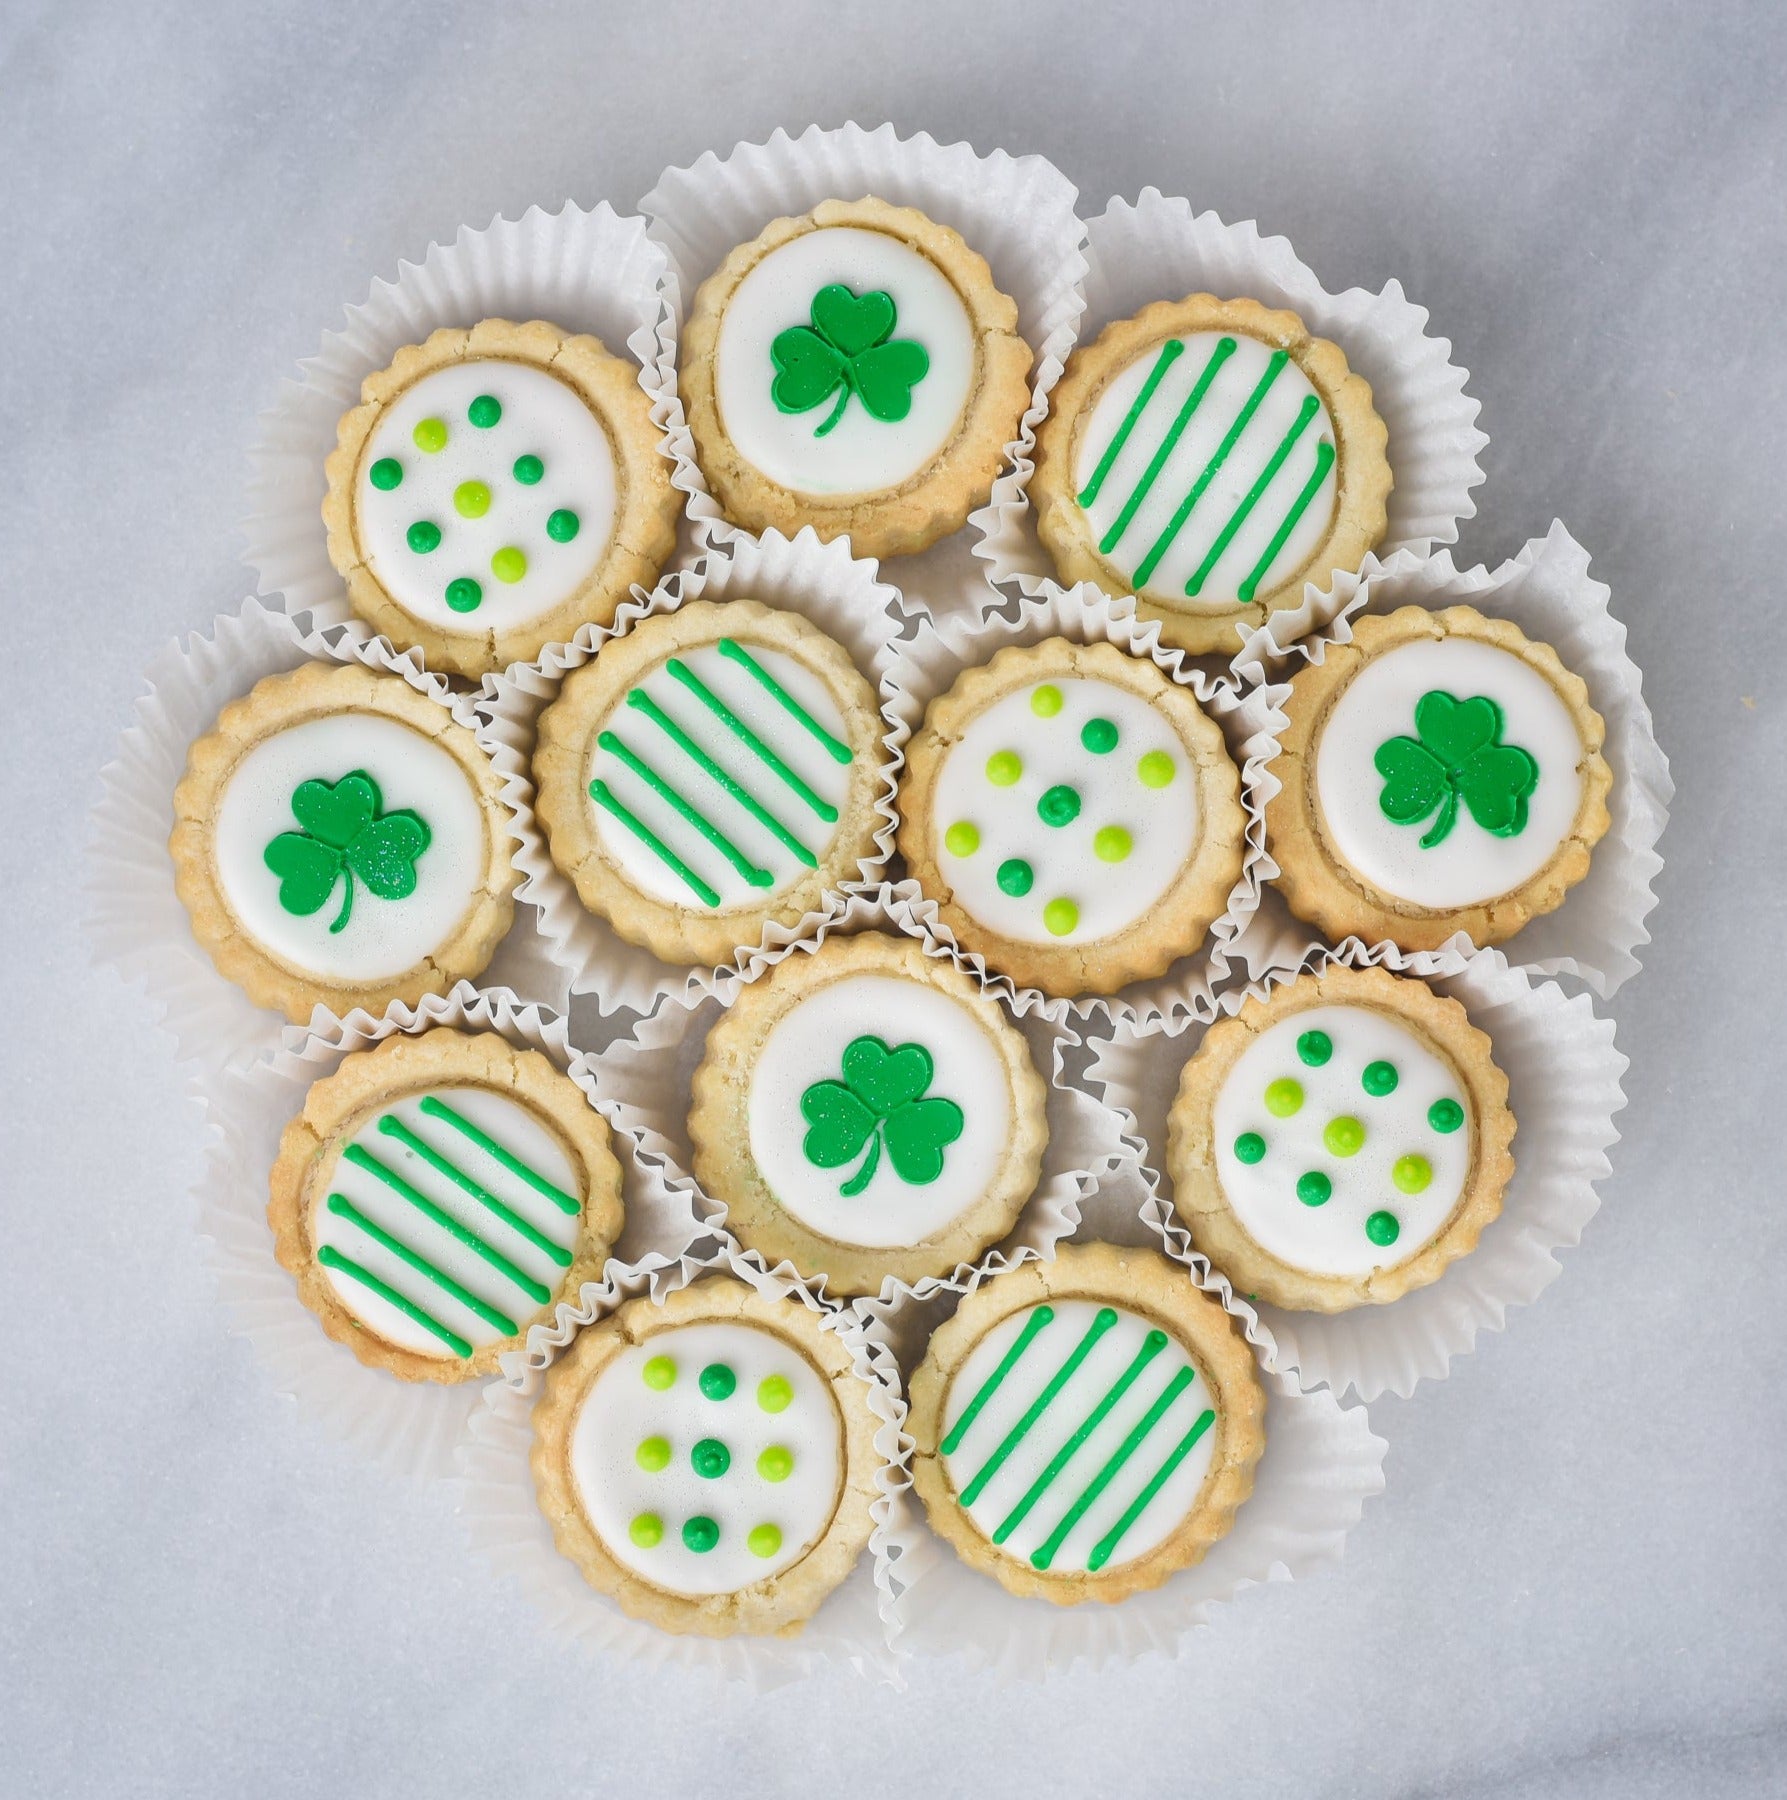 St. Patrick's Day Shortbreads - Gourmet Cookies, Custom Shortbreads & Holiday Gifts | Dallas, TX